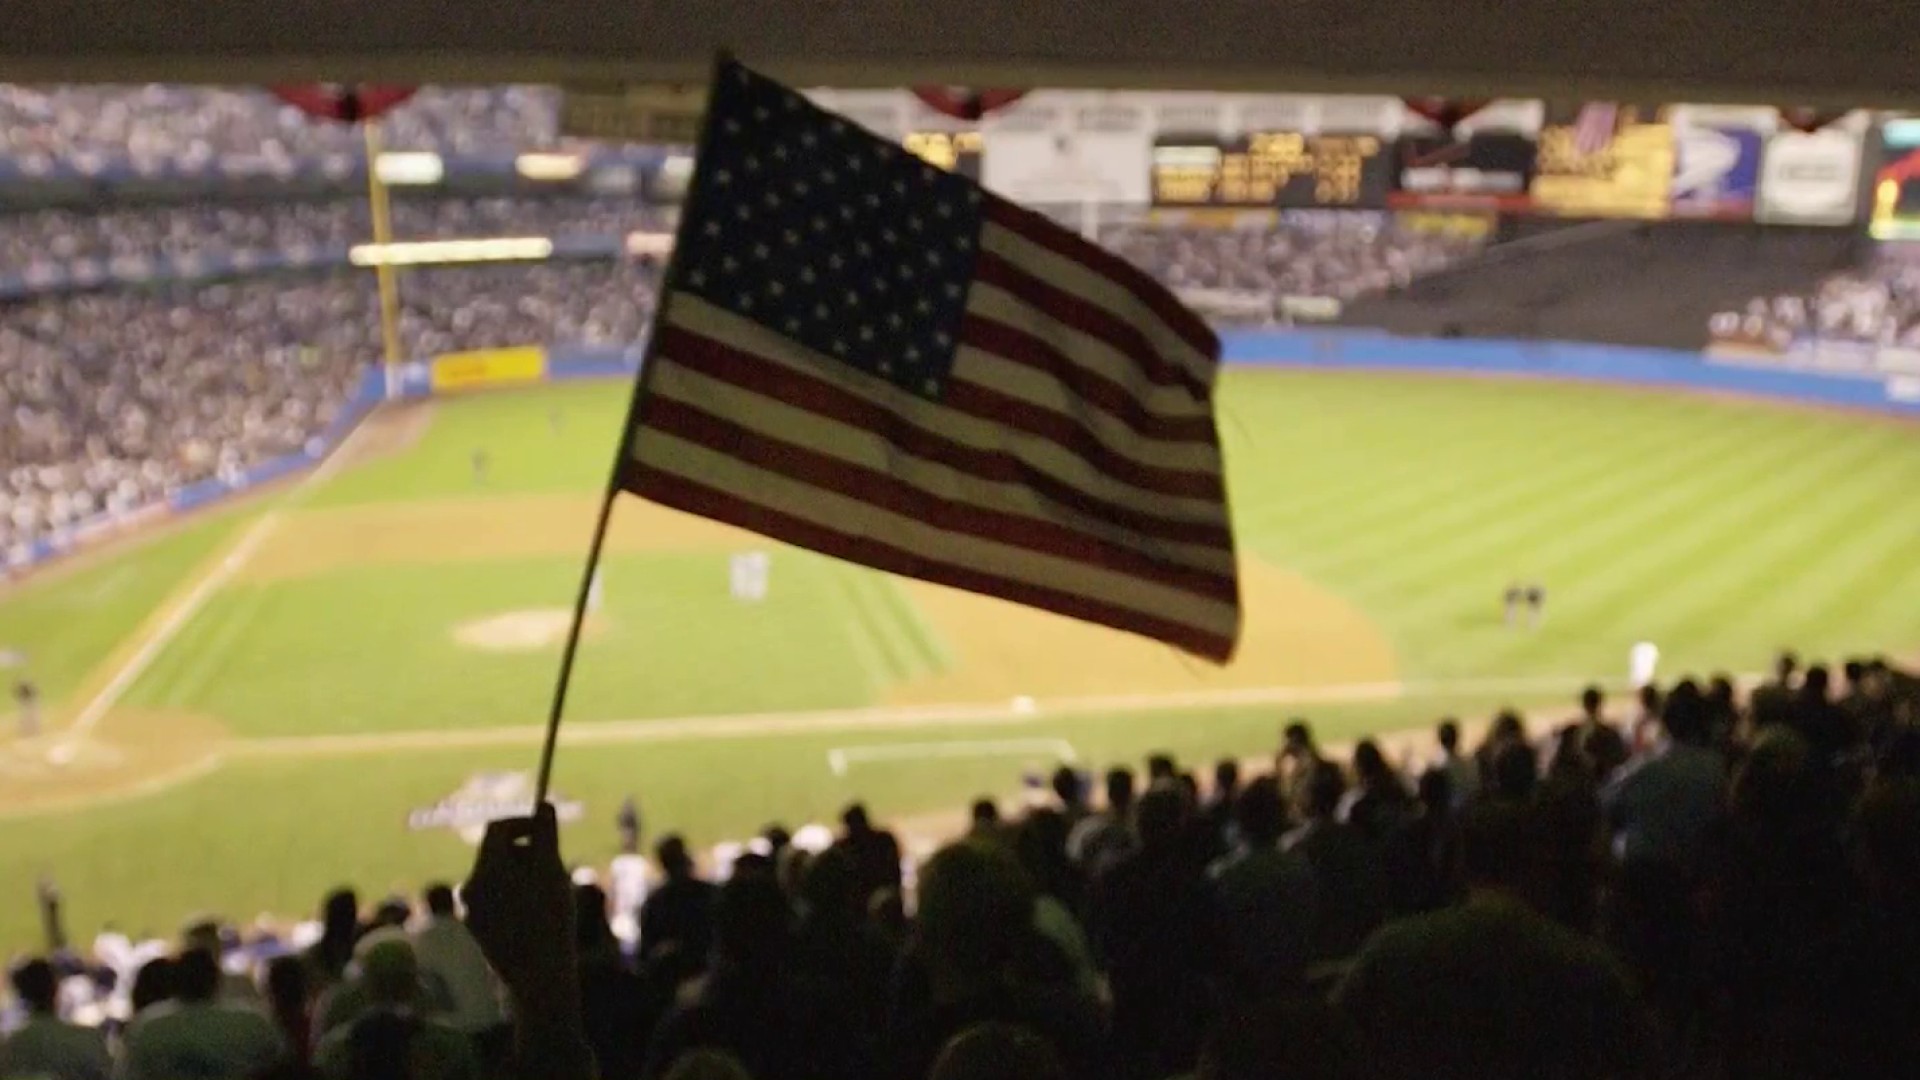 Yankees reflect on returning to baseball after 9/11